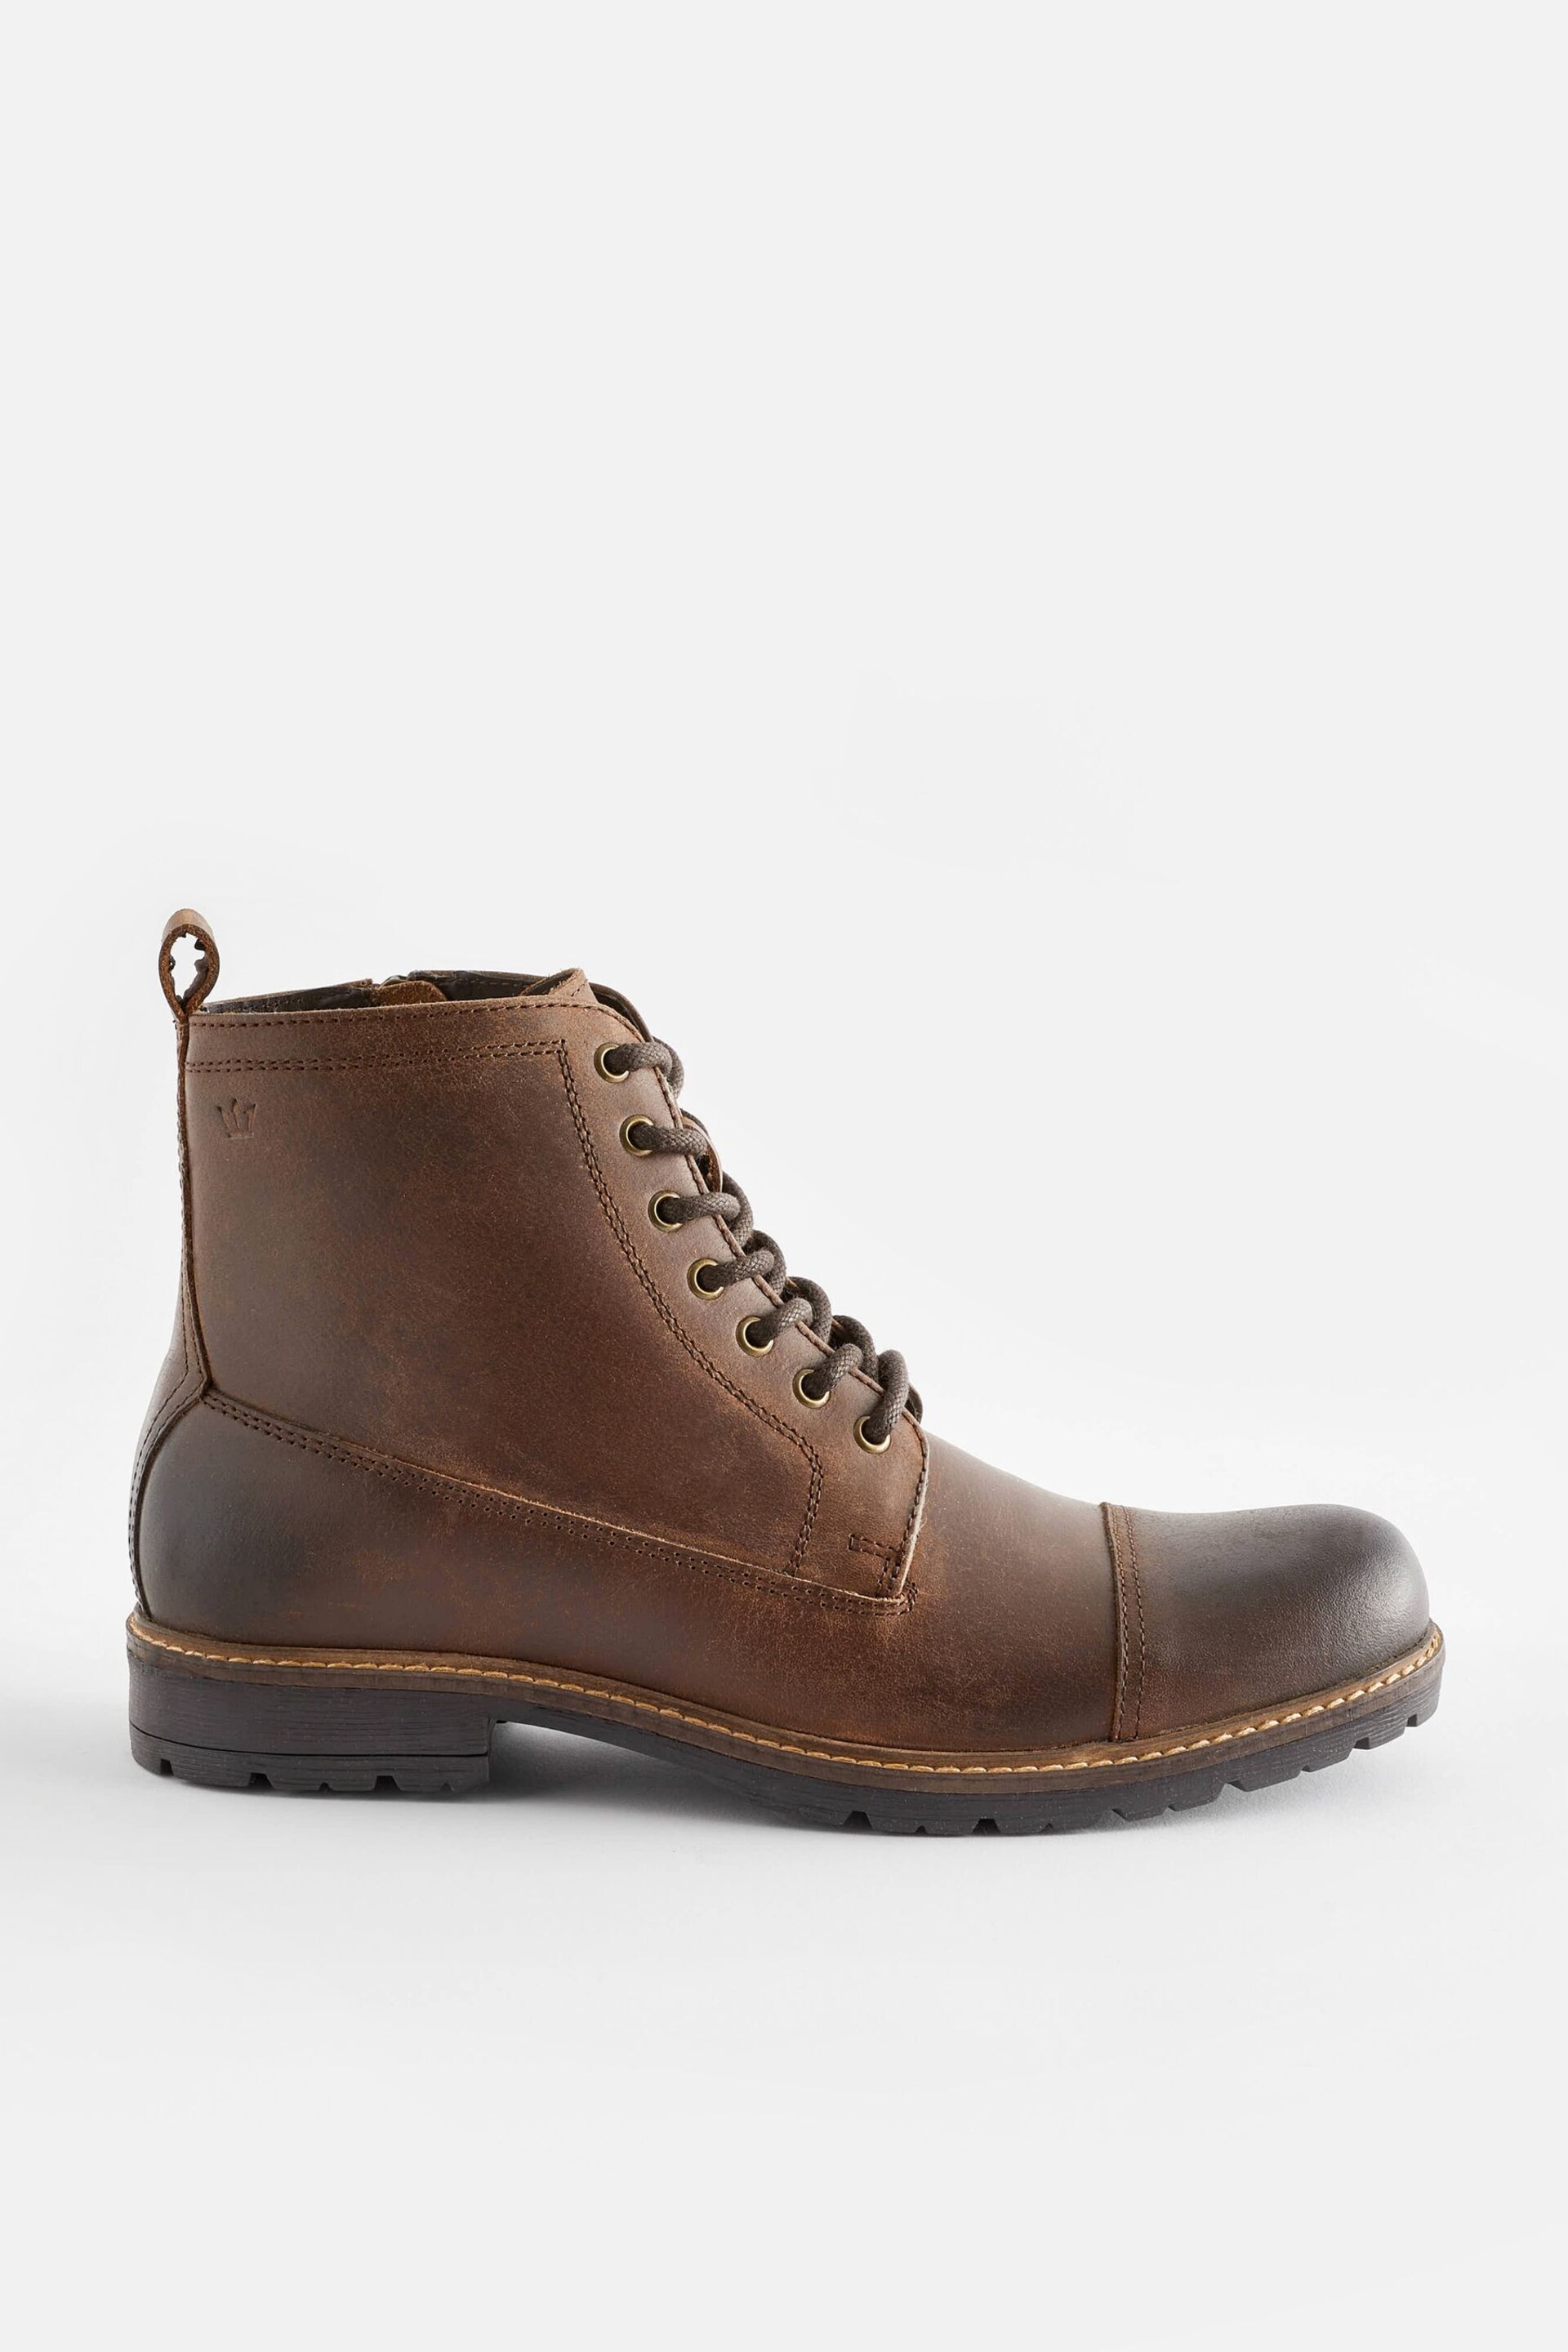 Brown Toe Cap Boots - Image 2 of 6